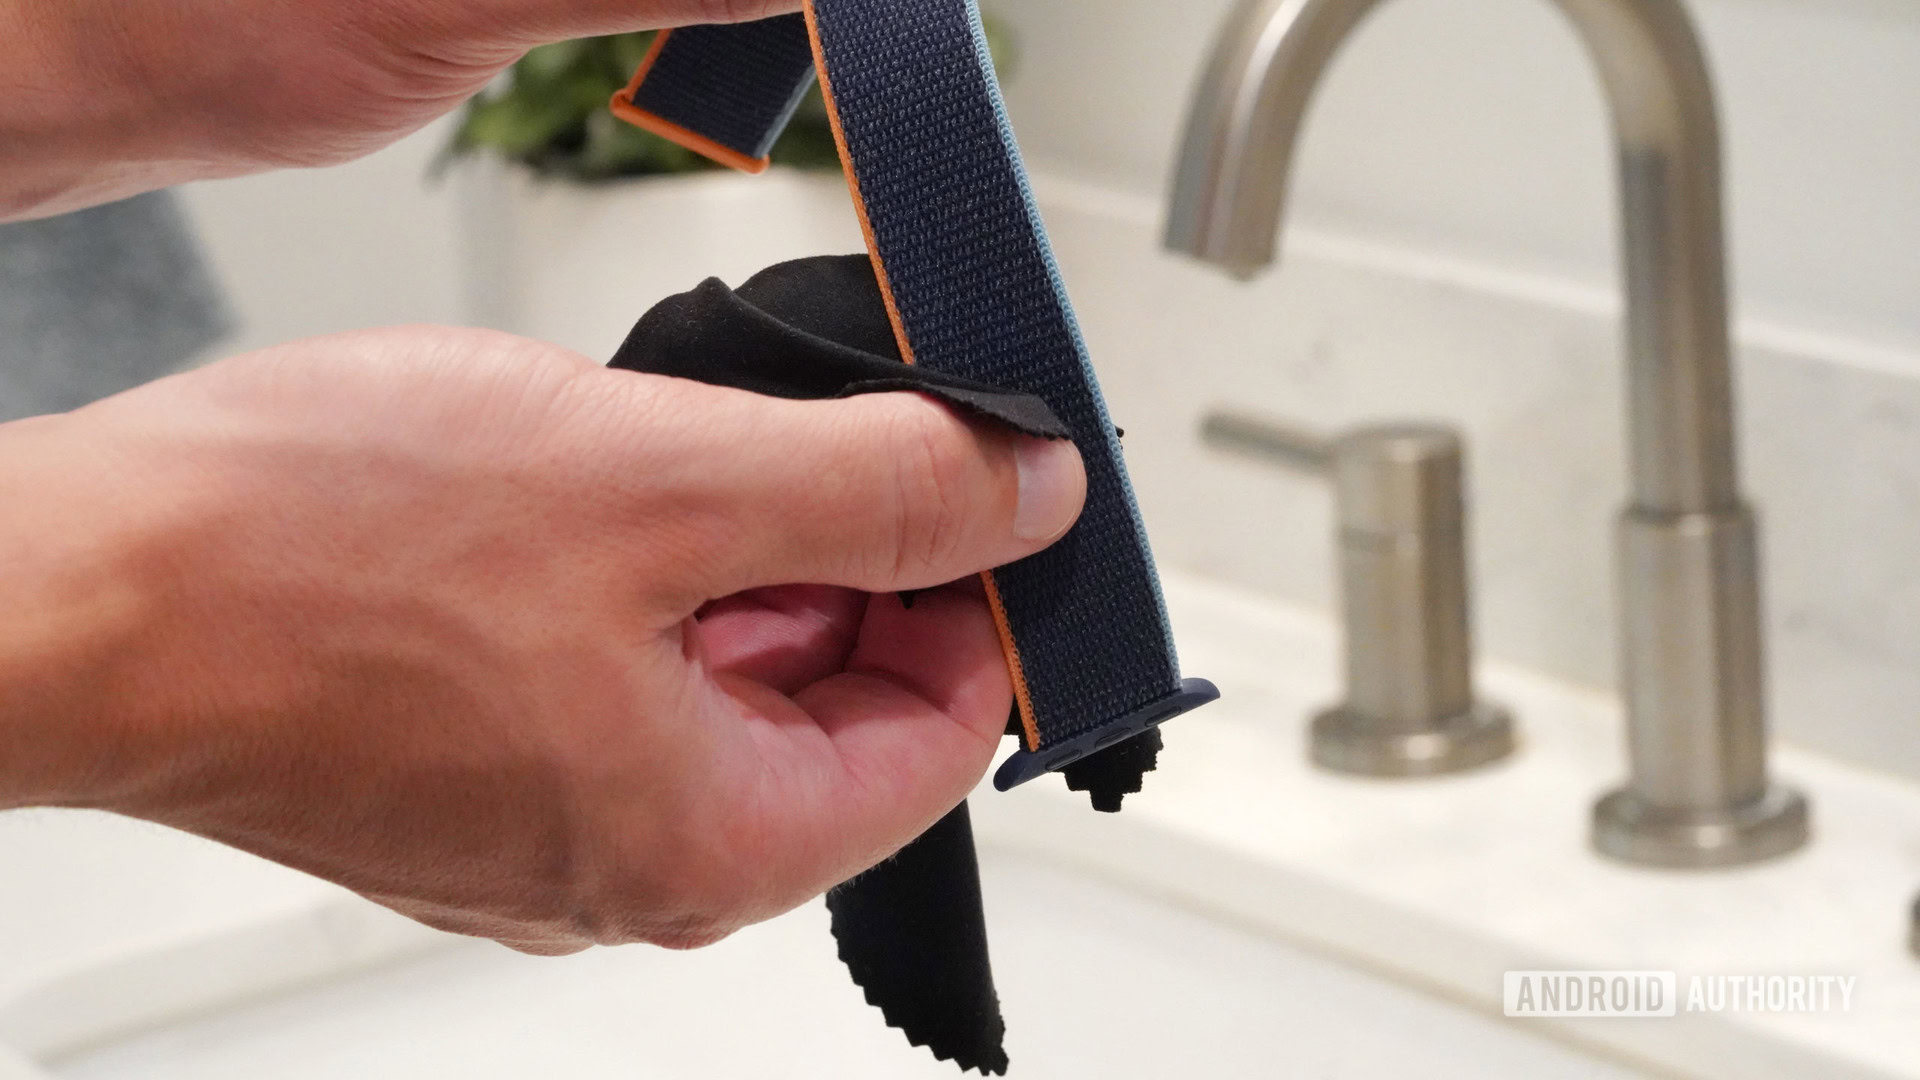 A man's hands clean an Apple Watch nylon band with a non-abrasive, lint-free cloth.